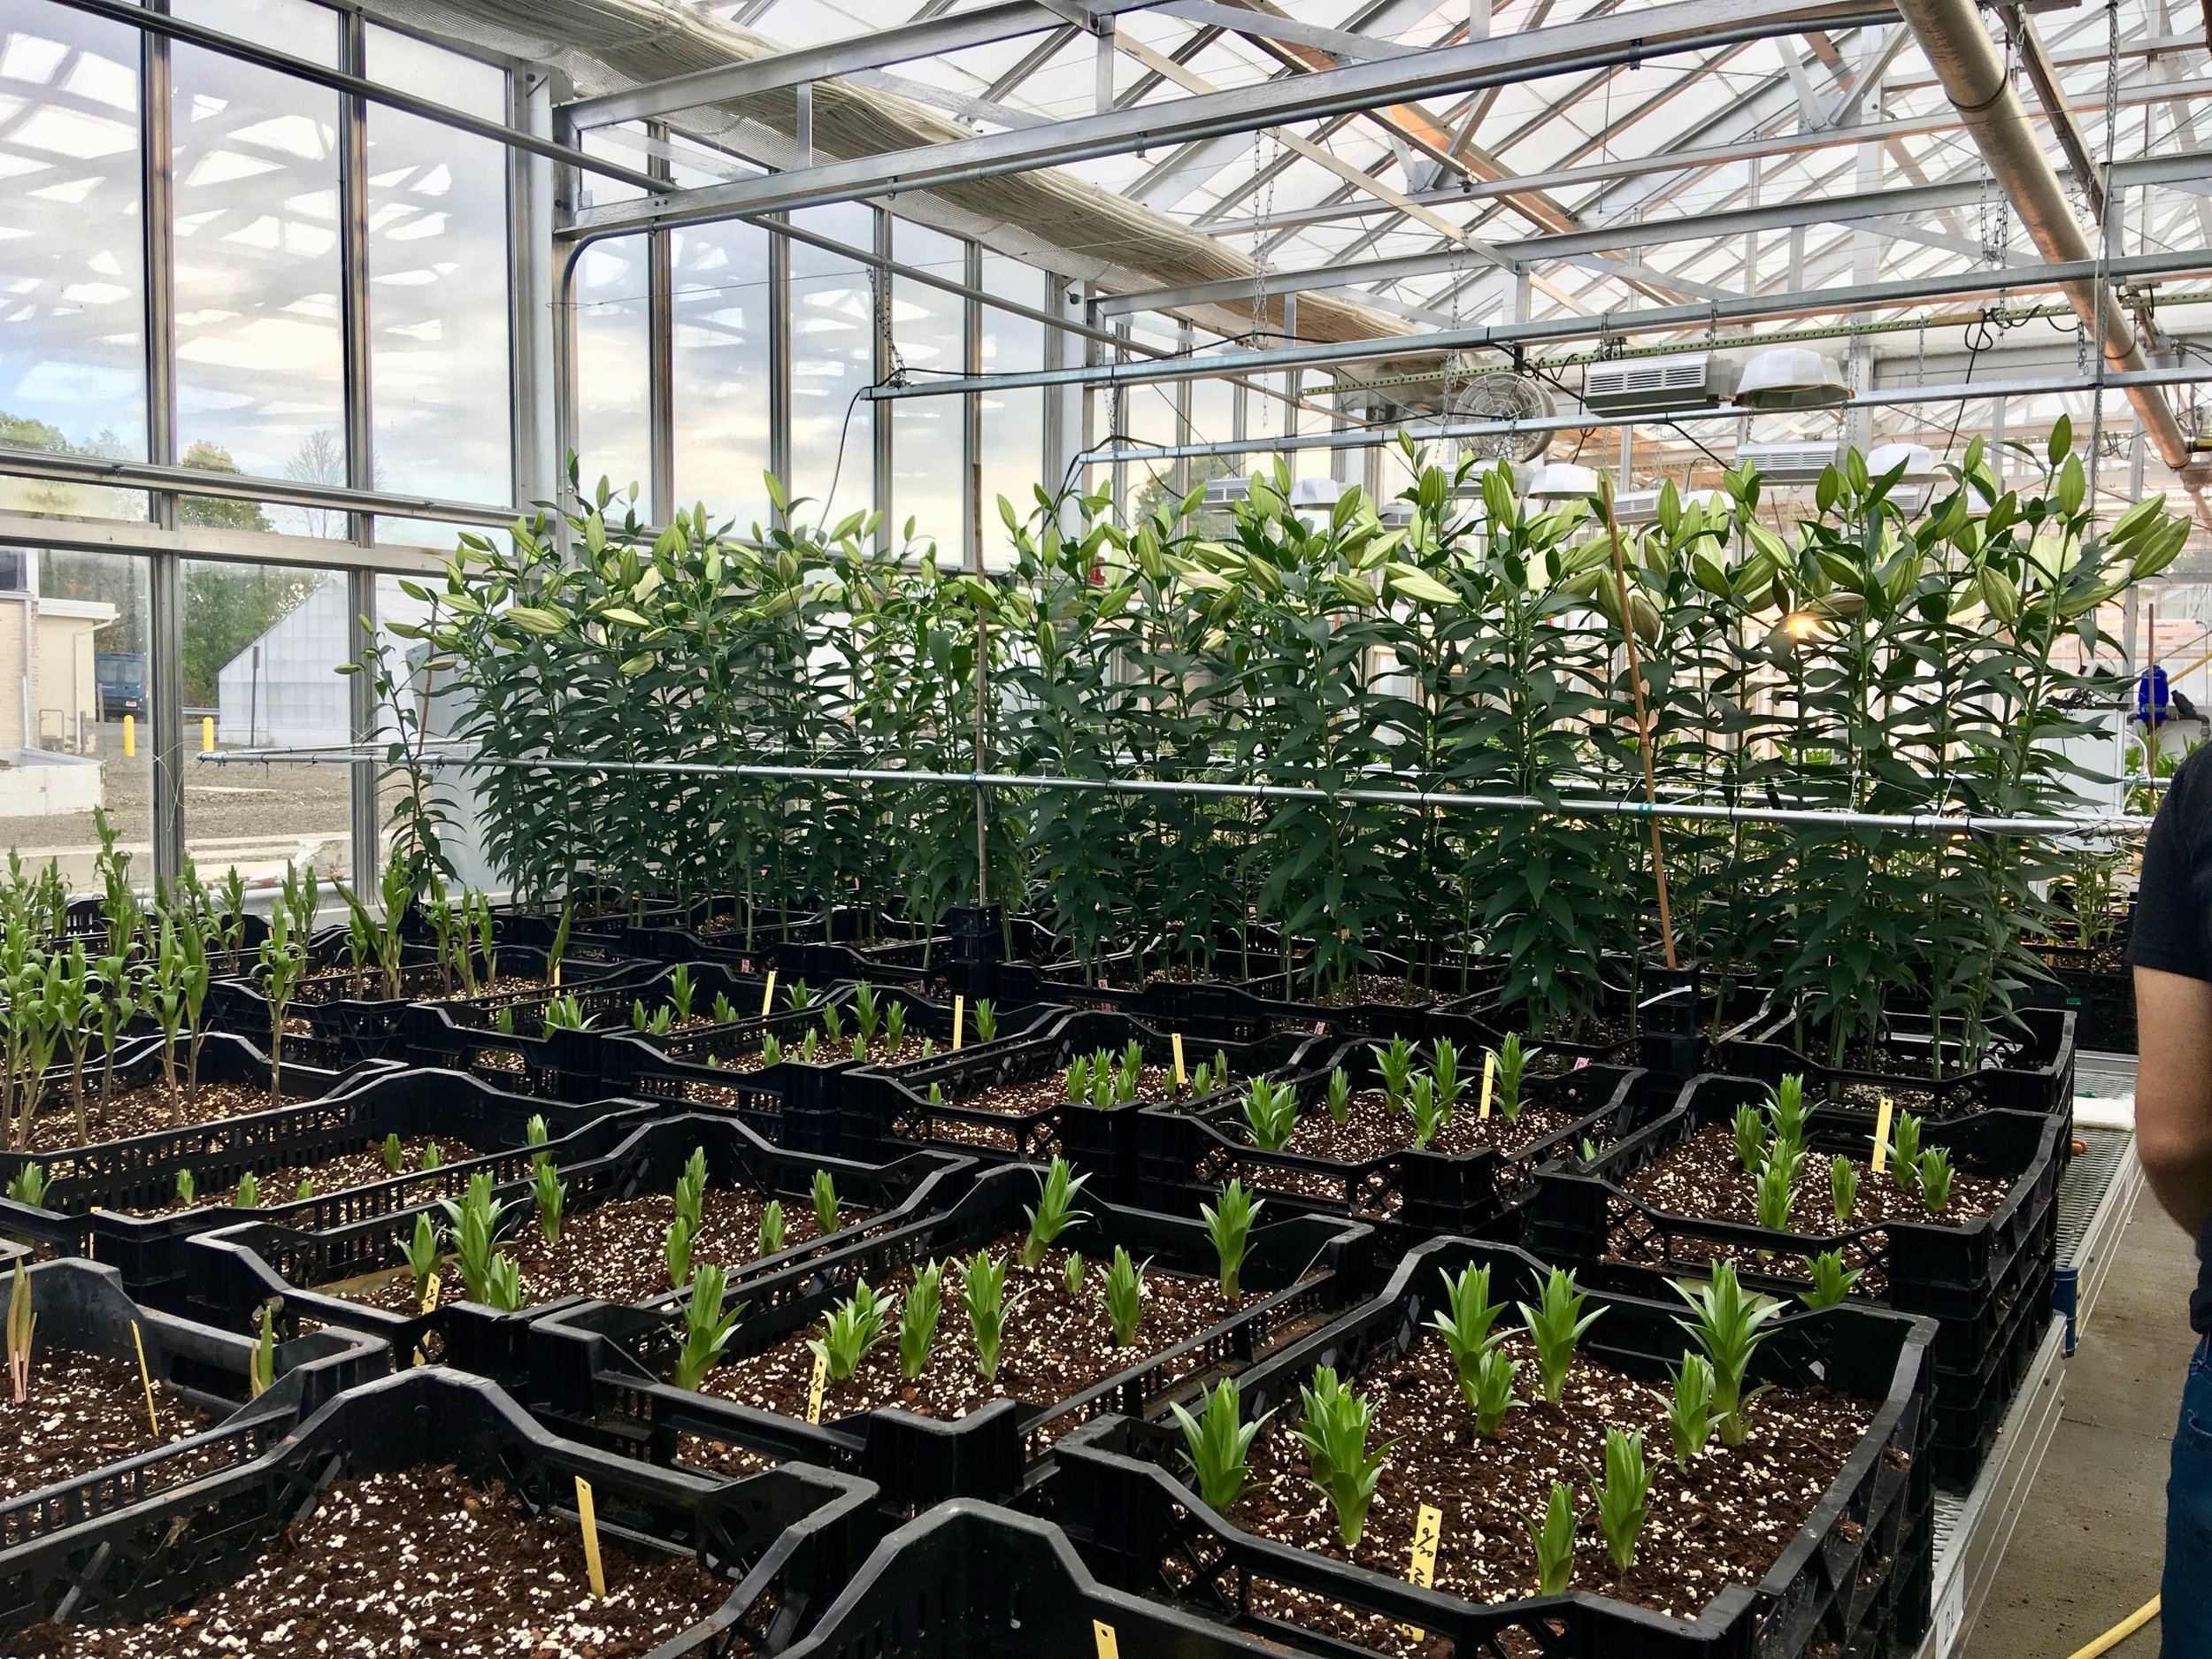 A plant experiment in the Kenneth Post Laboratory greenhouse at Cornell University.